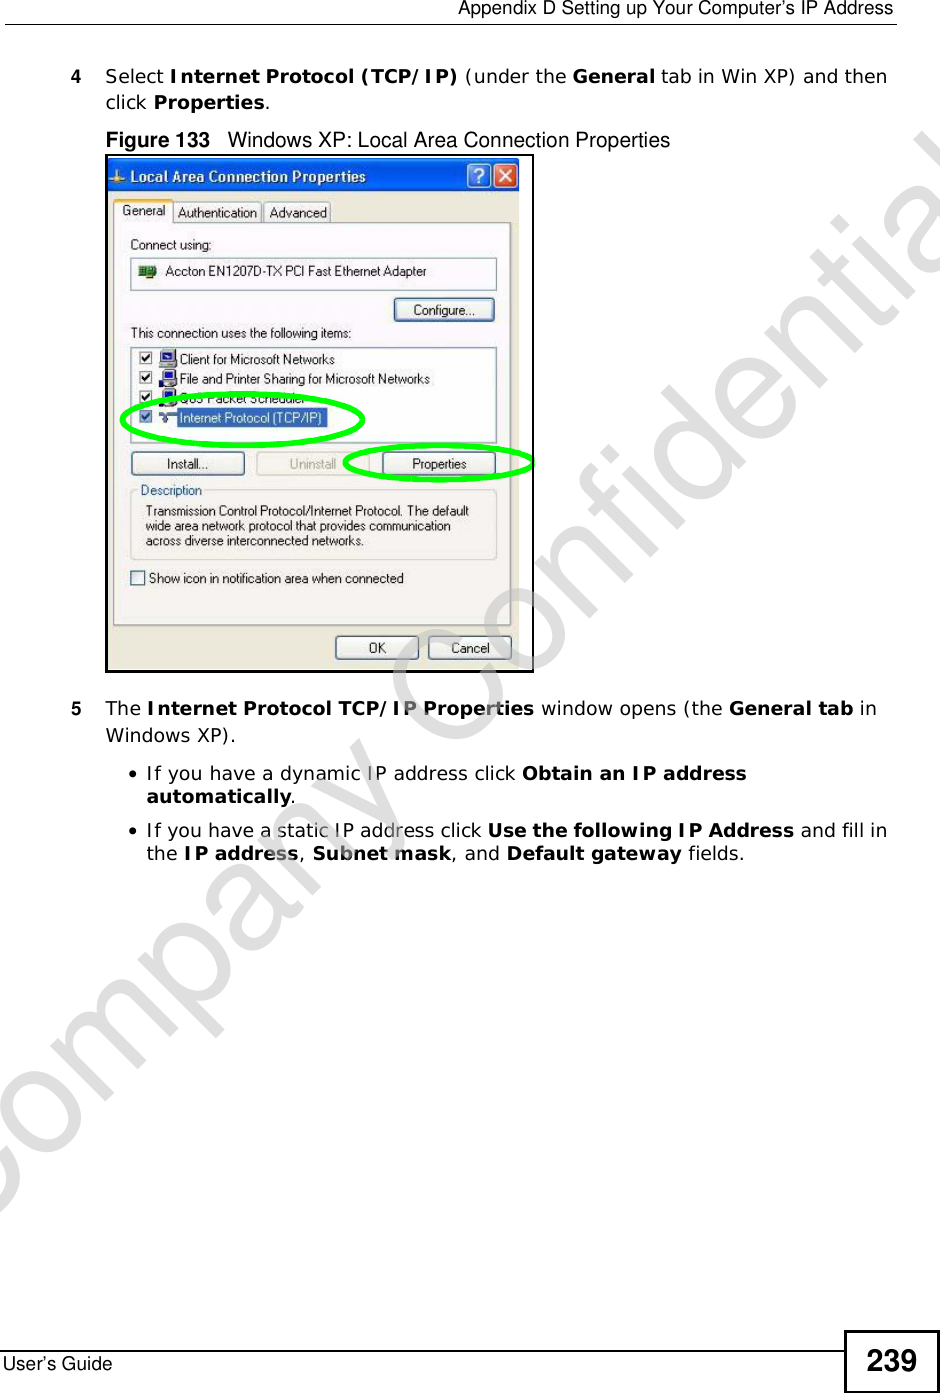  Appendix DSetting up Your Computer’s IP AddressUser’s Guide 2394Select Internet Protocol (TCP/IP) (under the General tab in Win XP) and then click Properties.Figure 133   Windows XP: Local Area Connection Properties5The Internet Protocol TCP/IP Properties window opens (the General tab in Windows XP).•If you have a dynamic IP address click Obtain an IP address automatically.•If you have a static IP address click Use the following IP Address and fill in the IP address,Subnet mask, and Default gateway fields. Company Confidential